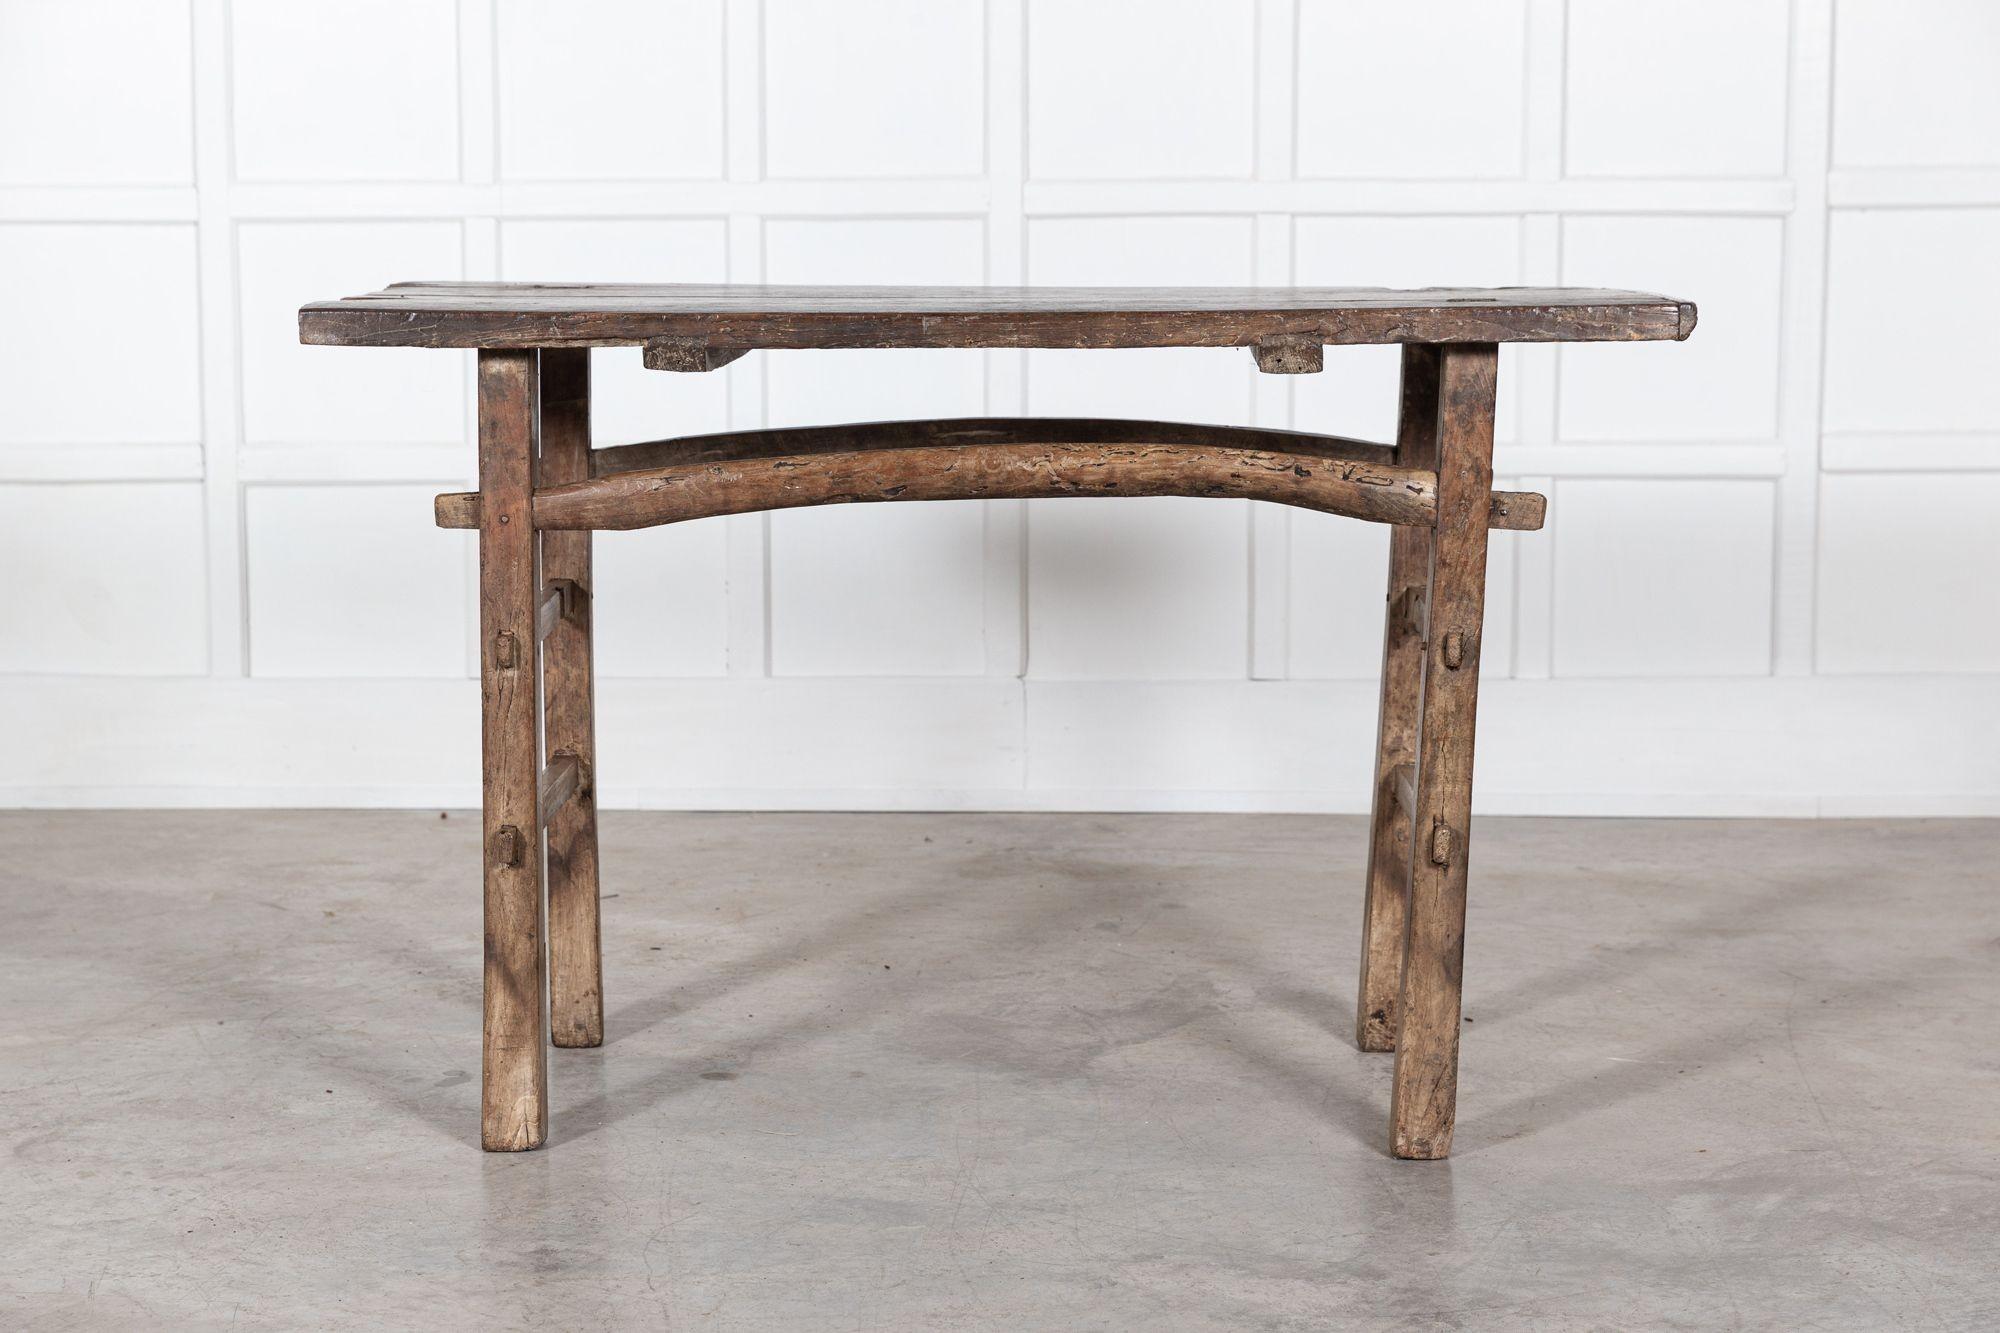 Circa 1850
19th C English elm vernacular work table.
sku 1350
We can also customise existing pieces to suit your scheme/requirements. We have our own workshop, restorers and finishers. From adapting to finishing pieces including, stripping,